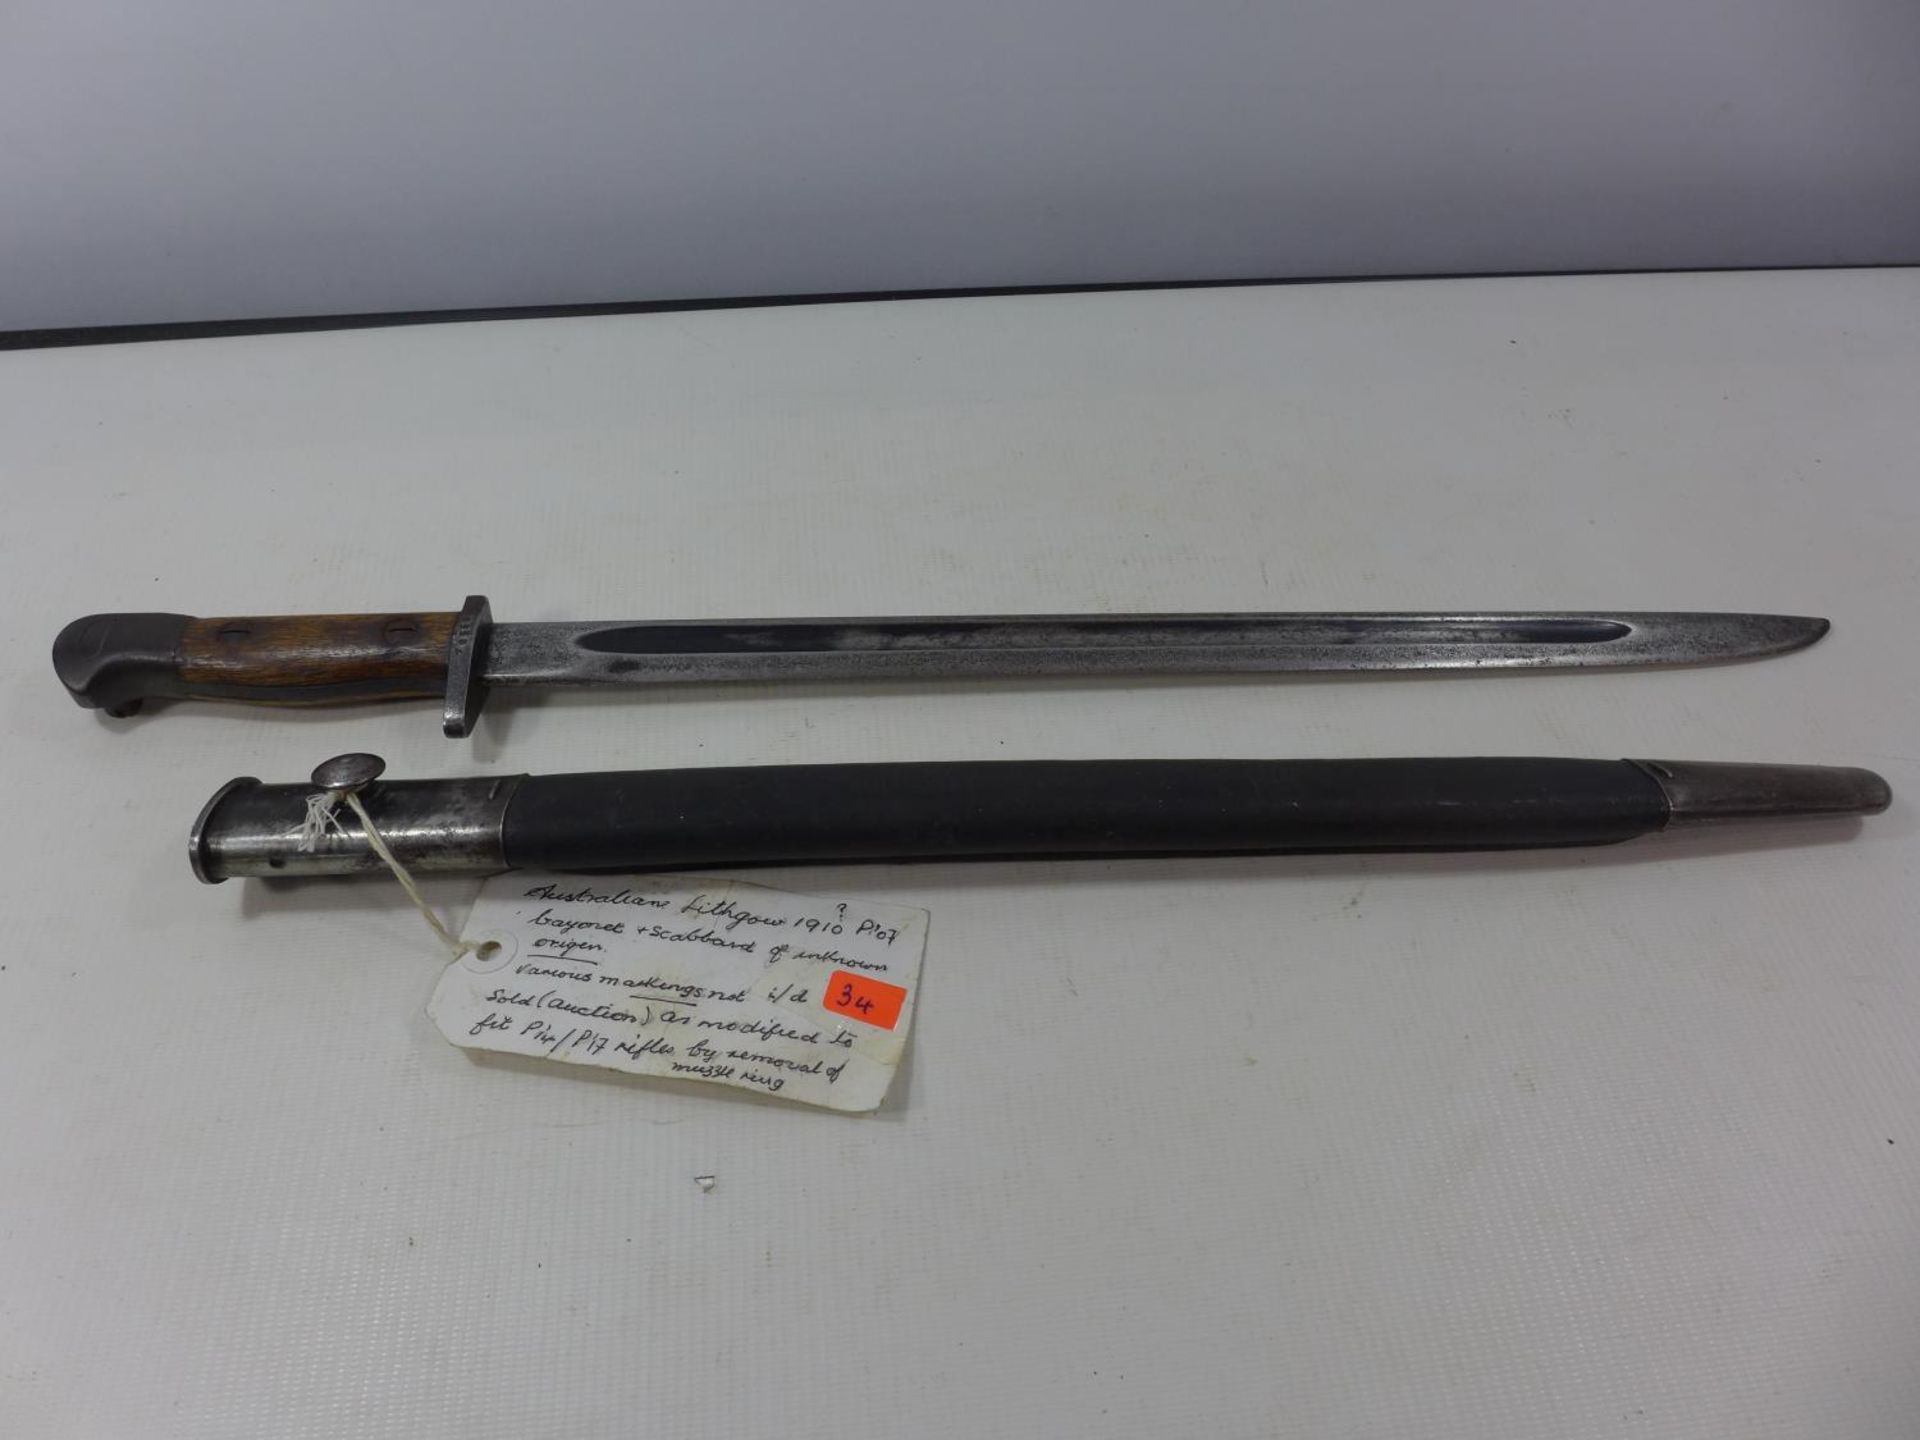 A RARE AUSTRALIAN LITHGOW P'07 BAYONET, 42CM BLADE, STEEL AND LEATHER SCABBARD